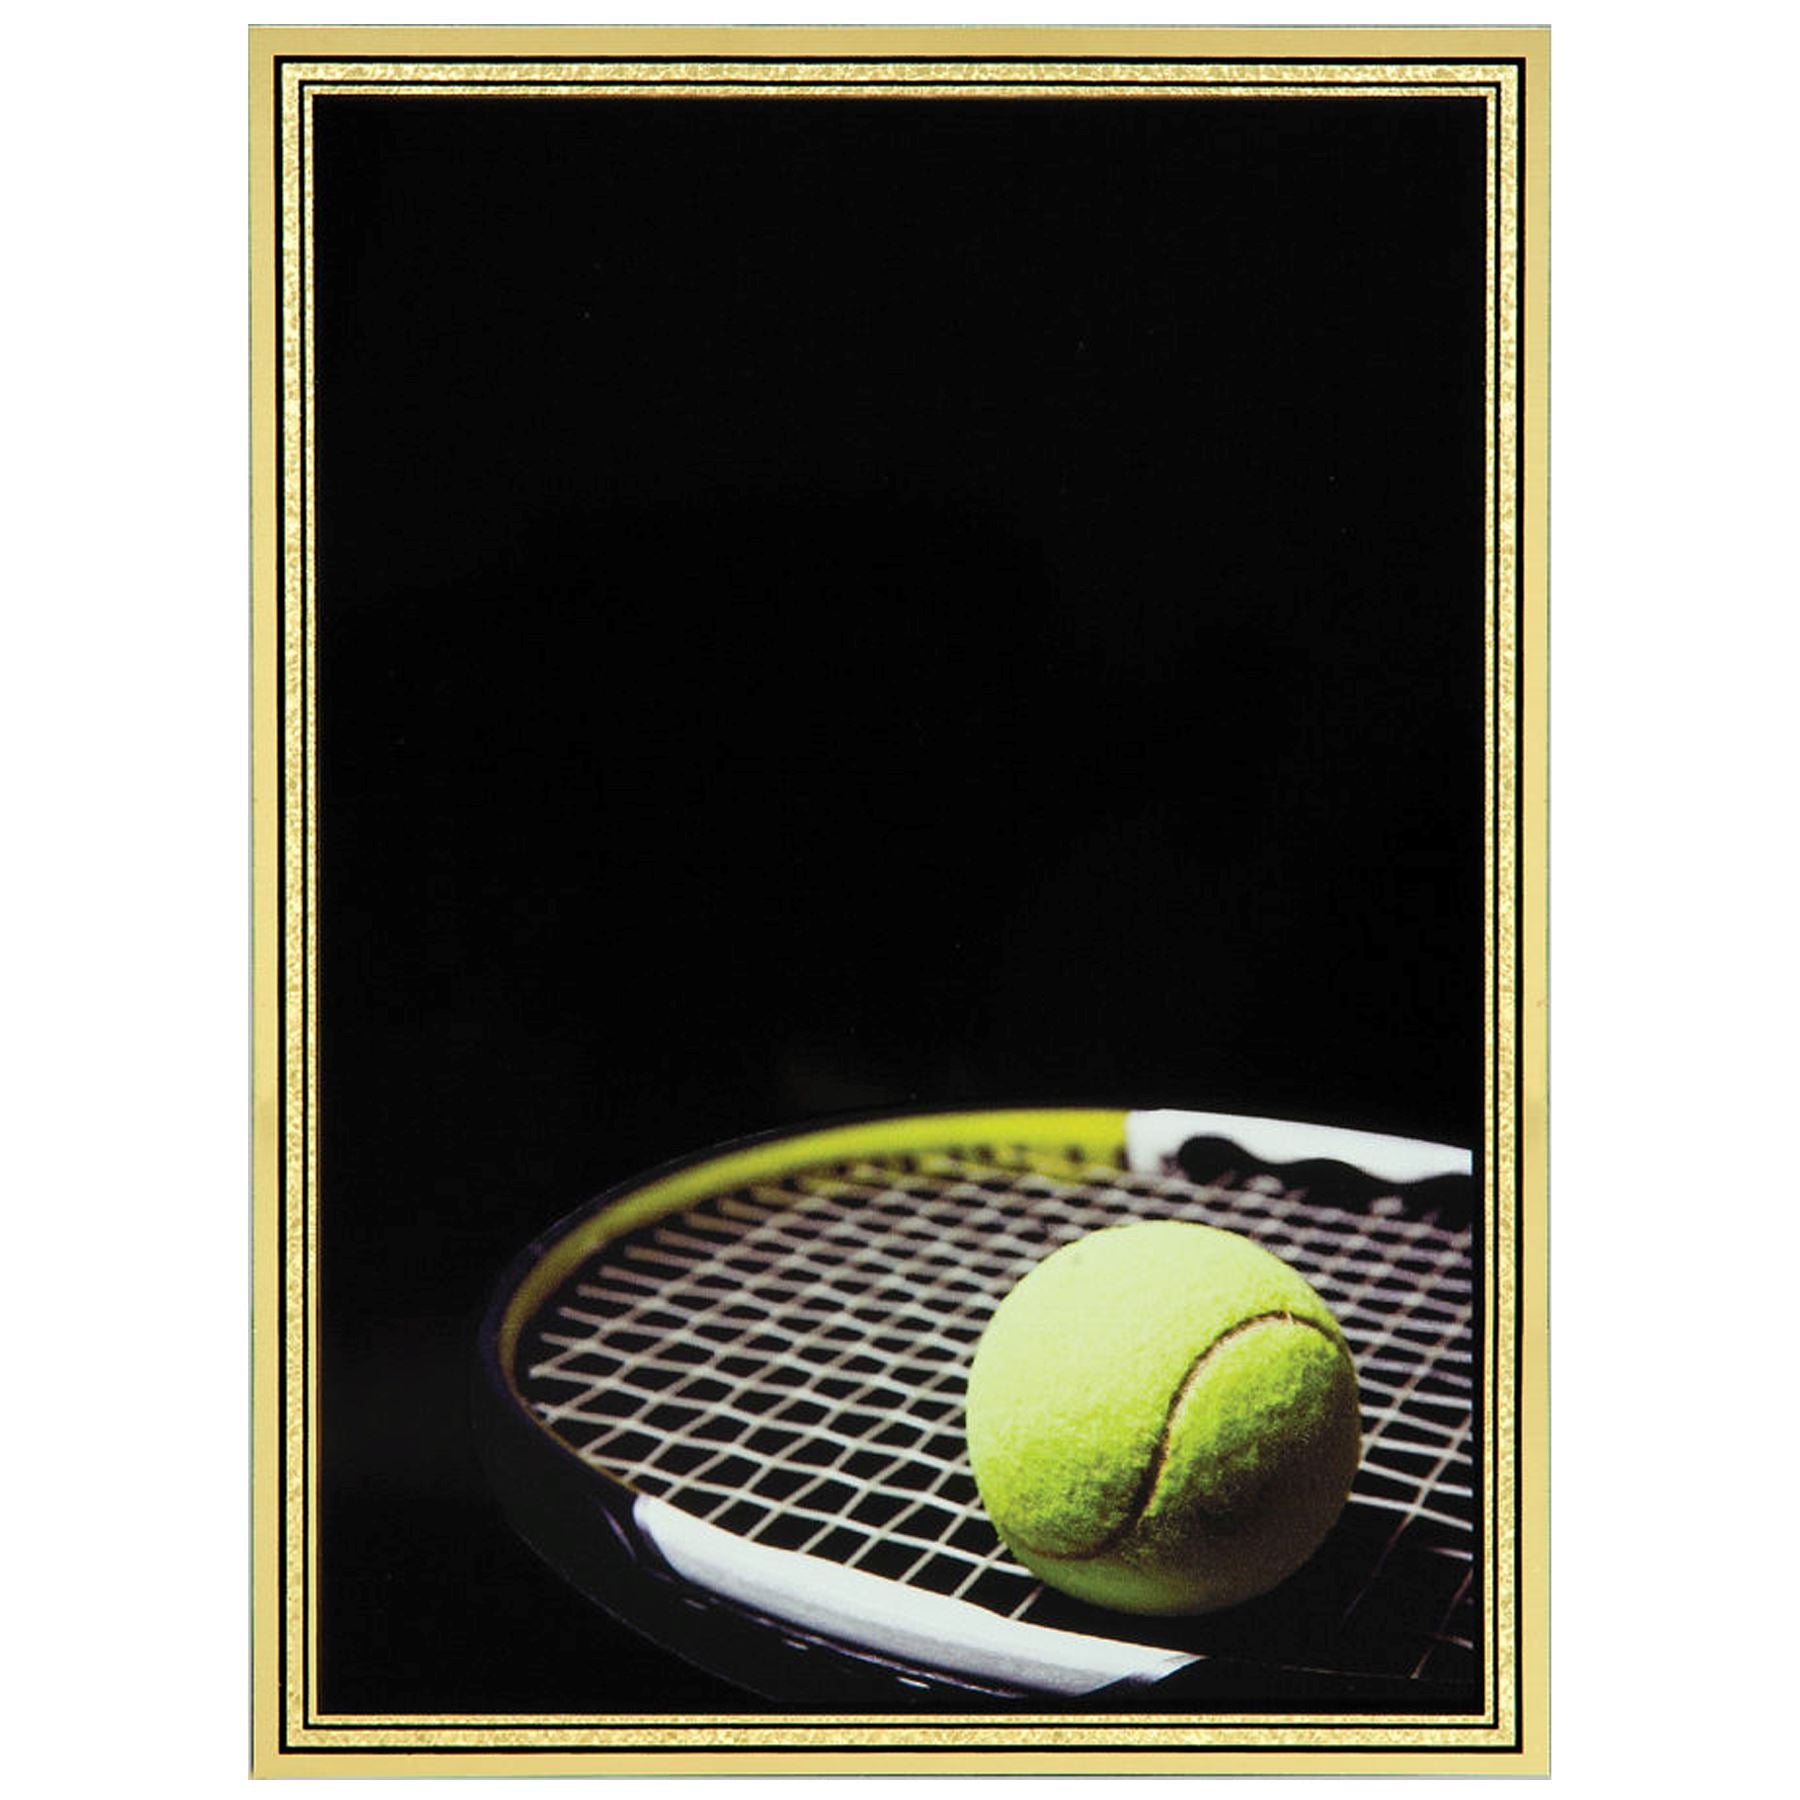 Brass Plated Steel Hi-Def Plaque Plate, Tennis, 3 7/8" x 5 7/8" Plaque Craftworks NW 